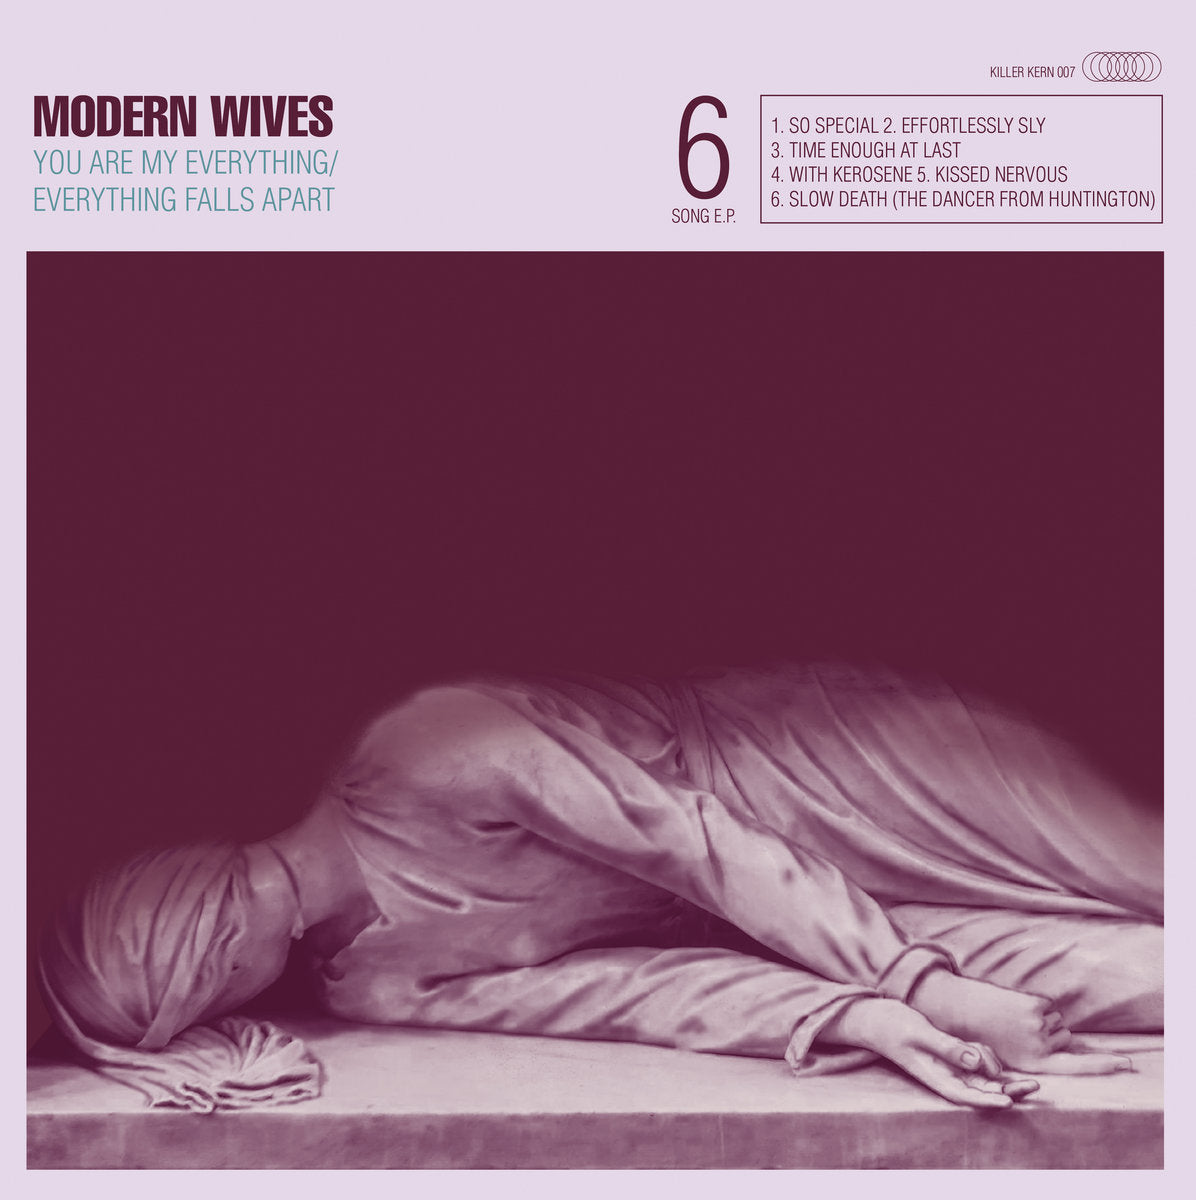 MODERN WIVES - YOU ARE MY EVERYTHING / EVERYTHING FALLS APART Vinyl LP